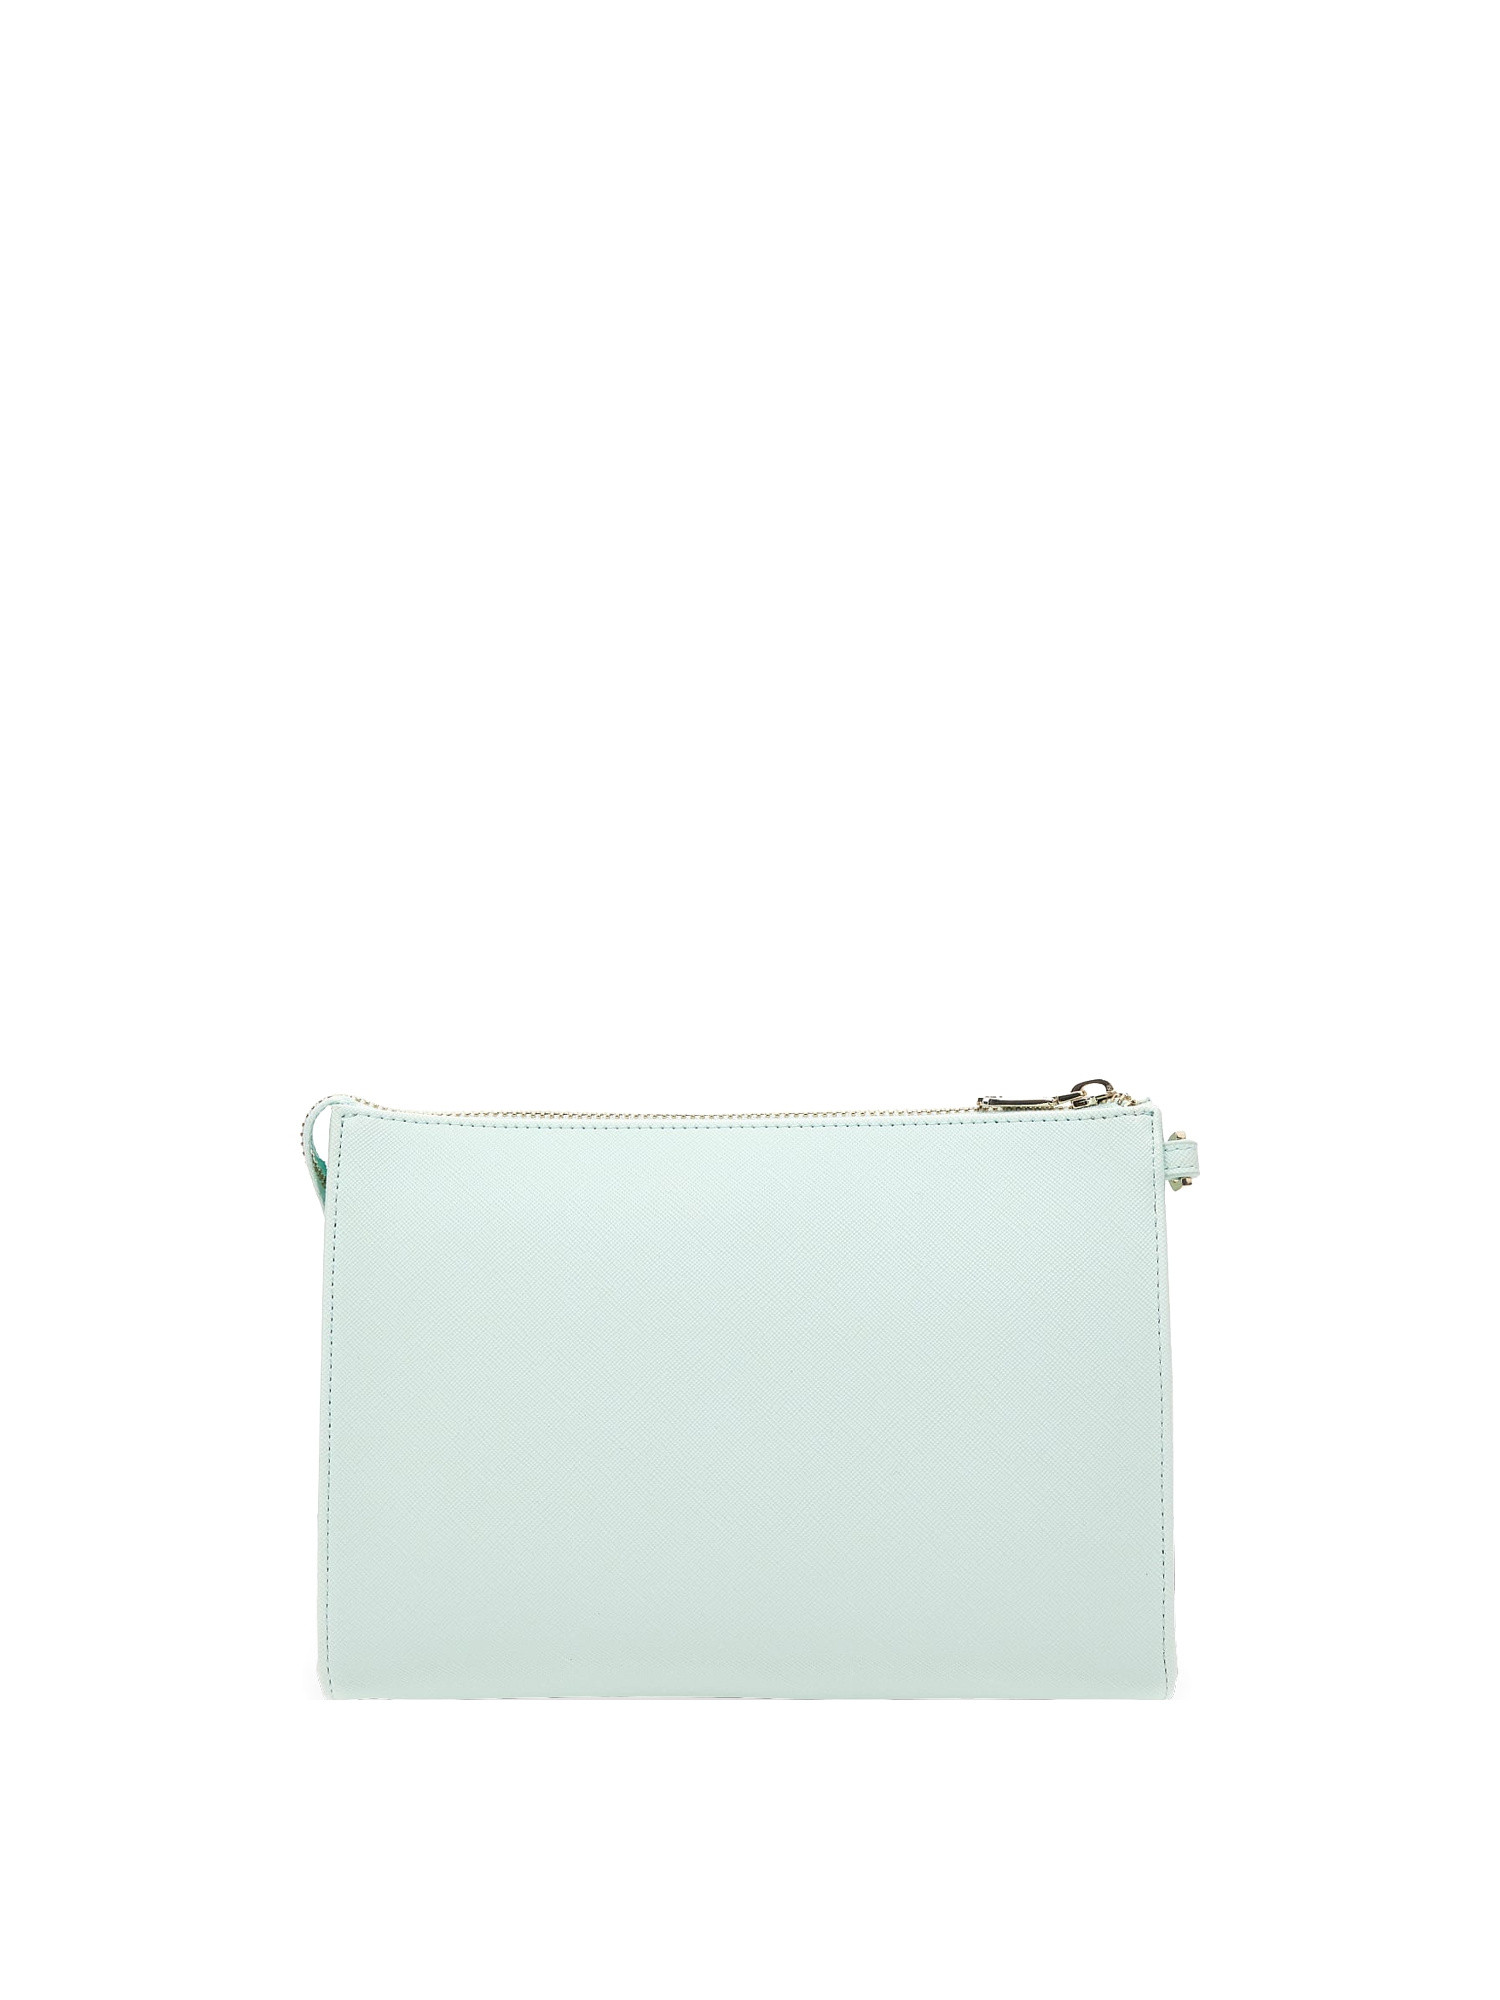 Guess - Logo pouch, Light Green, large image number 1